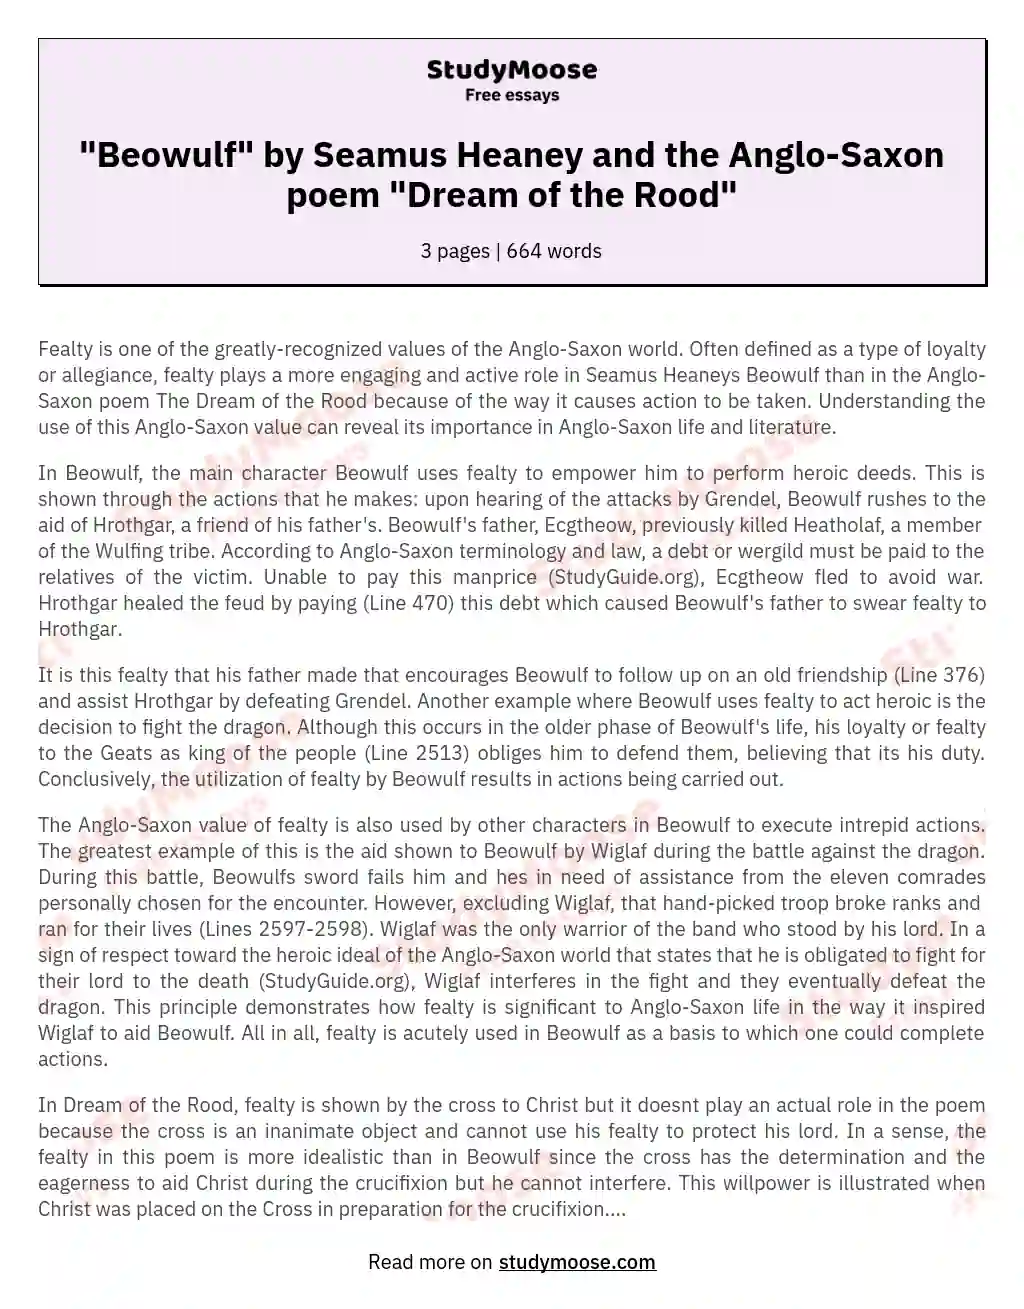 "Beowulf" by Seamus Heaney and the Anglo-Saxon poem "Dream of the Rood"